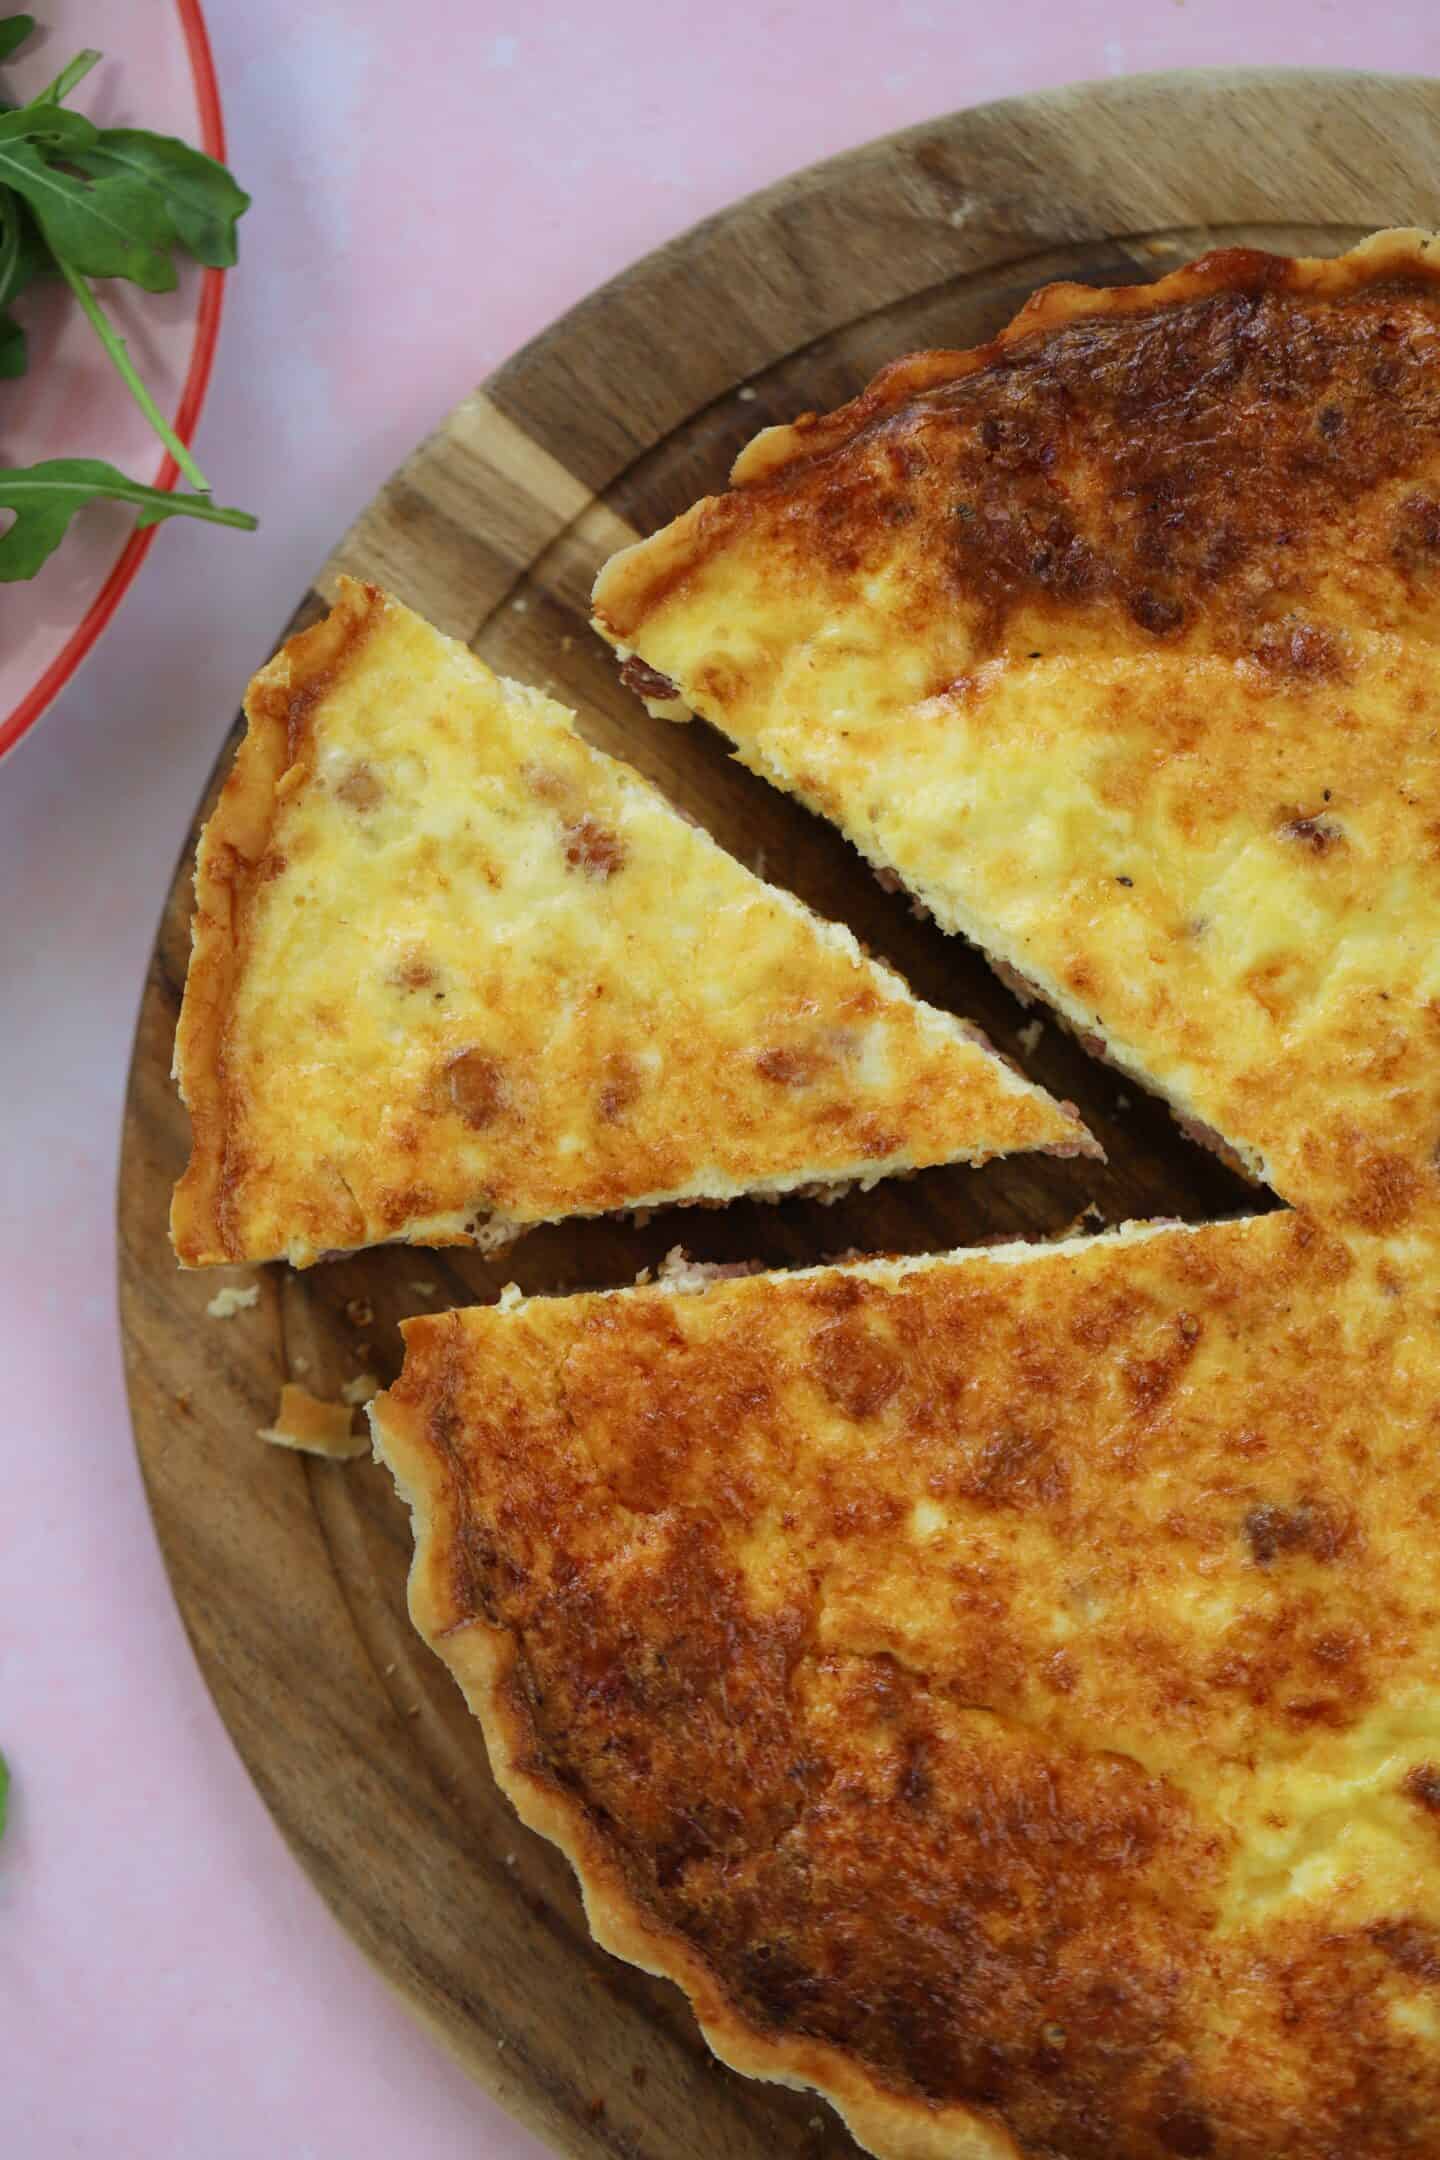 A gluten free quiche lorraine with a slice cut out.